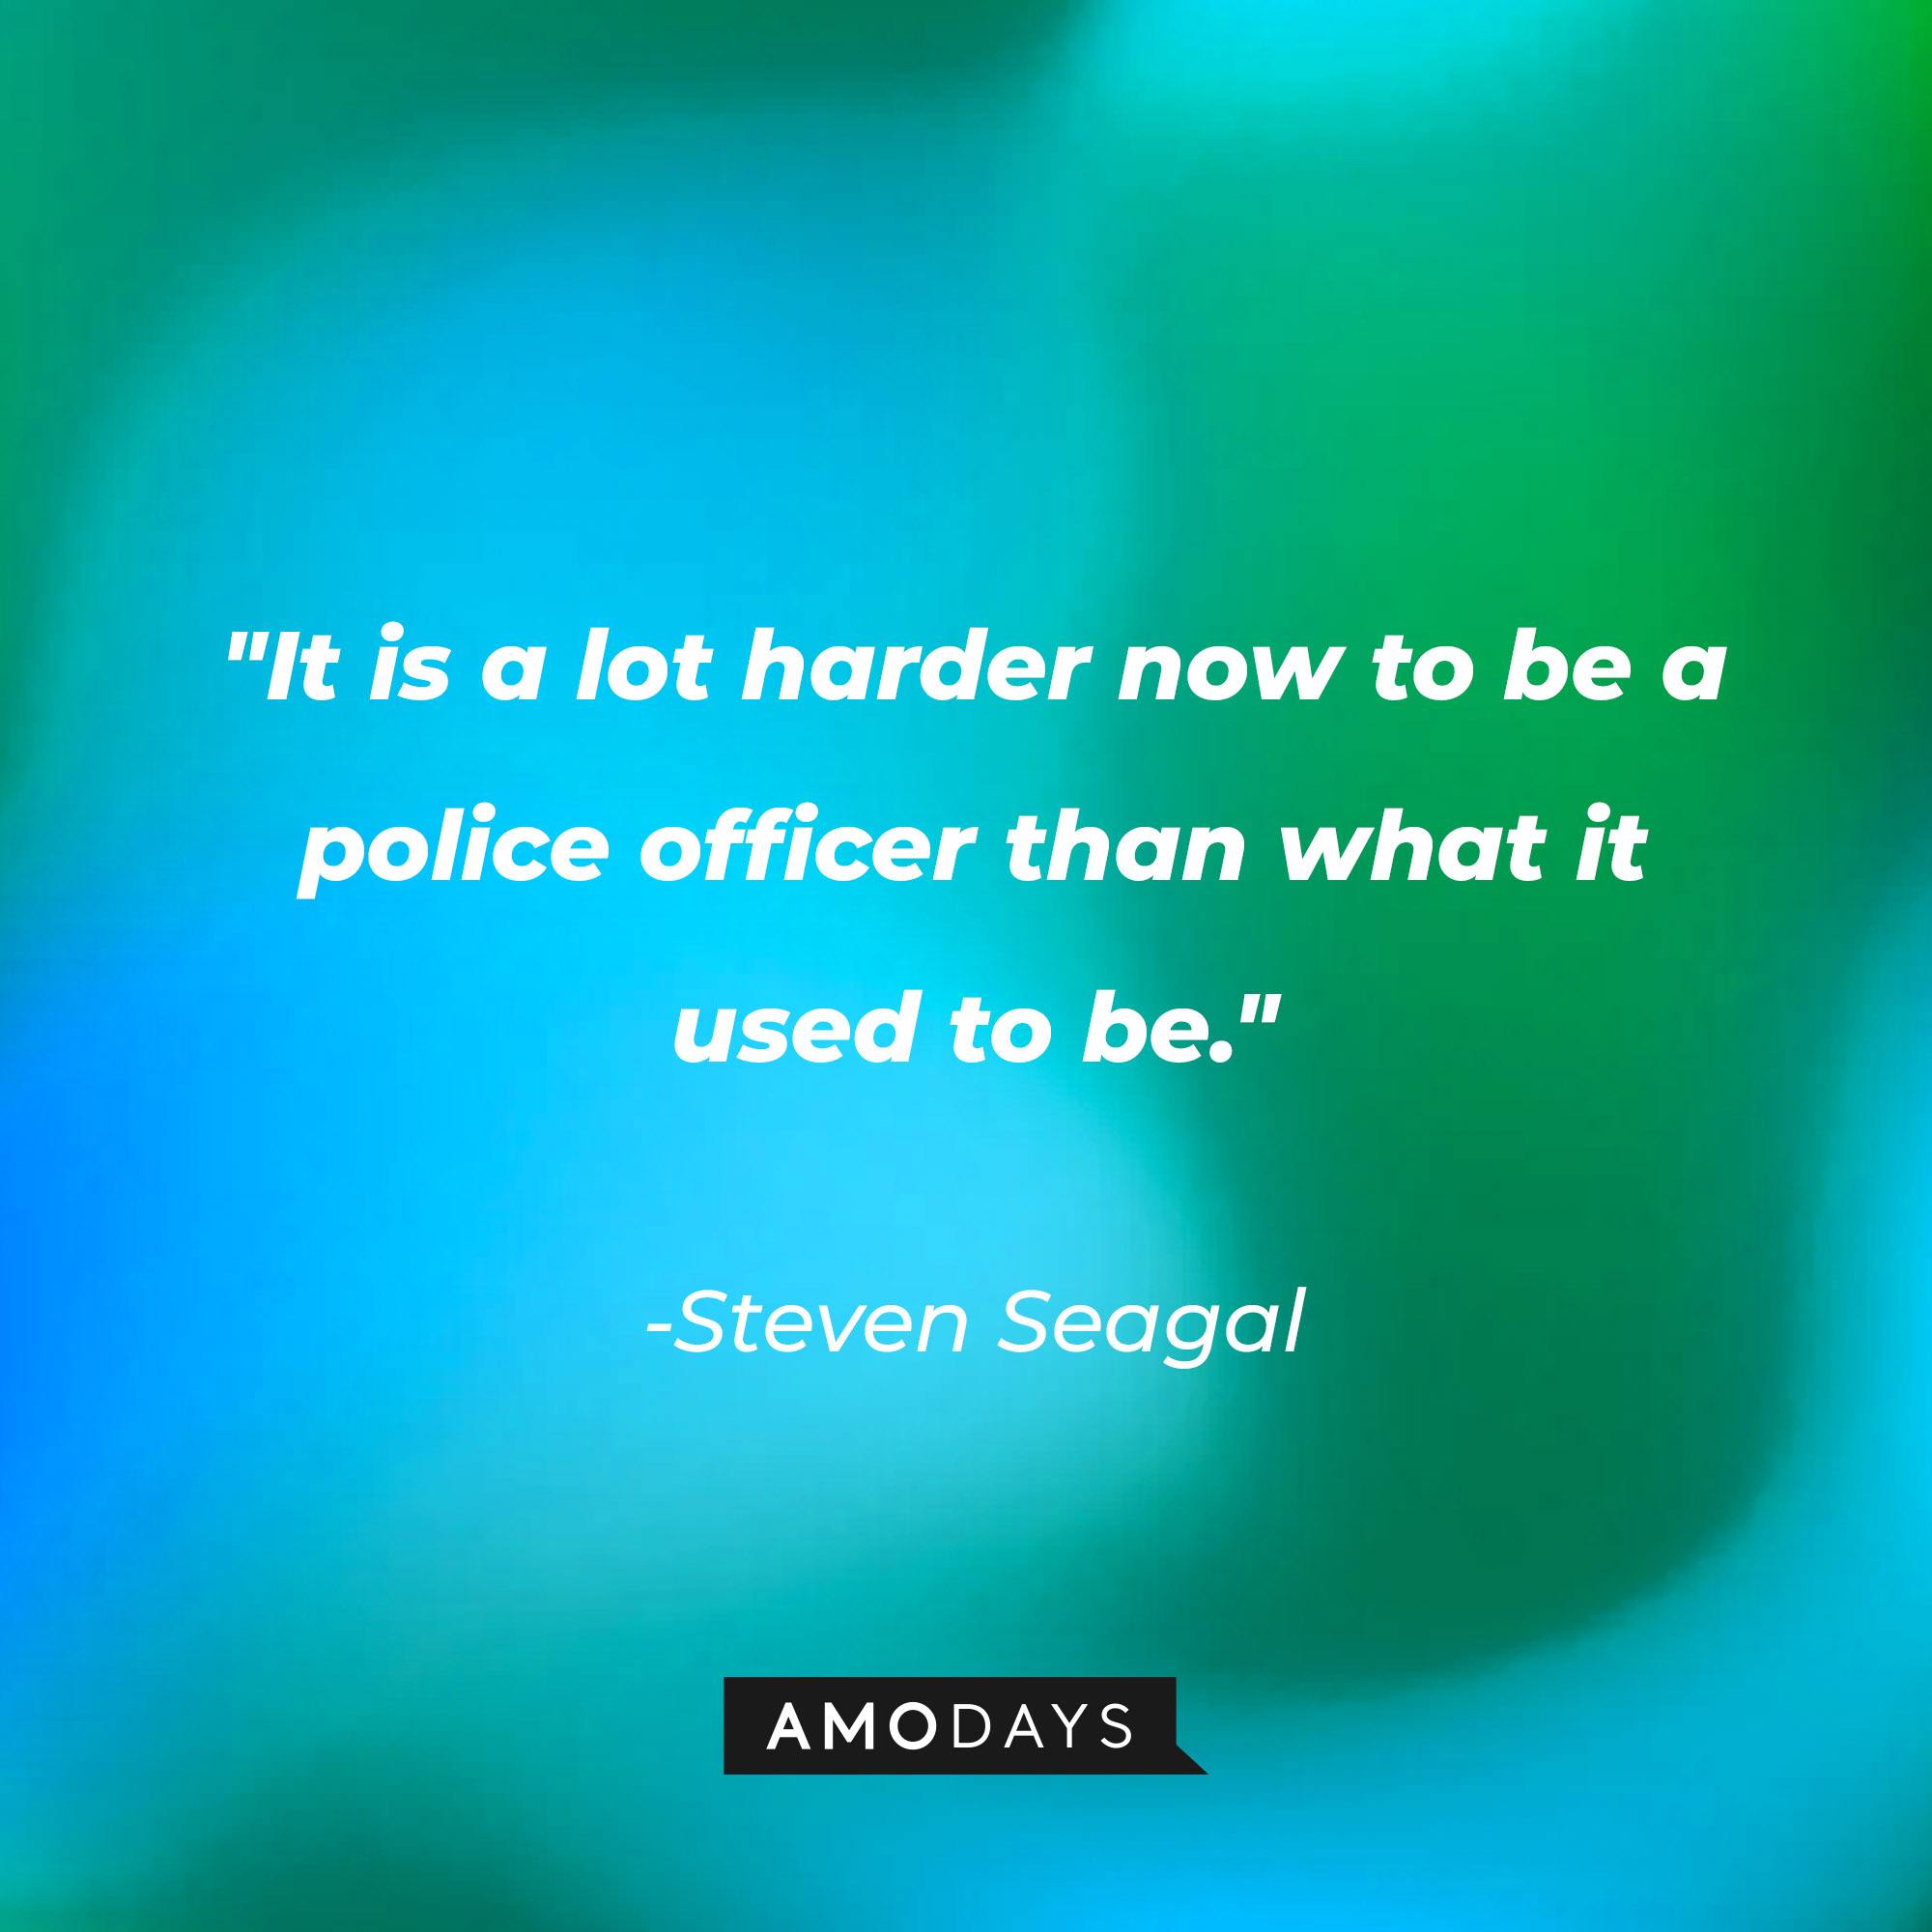 Steven Seagal’s quote: "It is a lot harder now to be a police officer than what it used to be." | Image: AmoDays